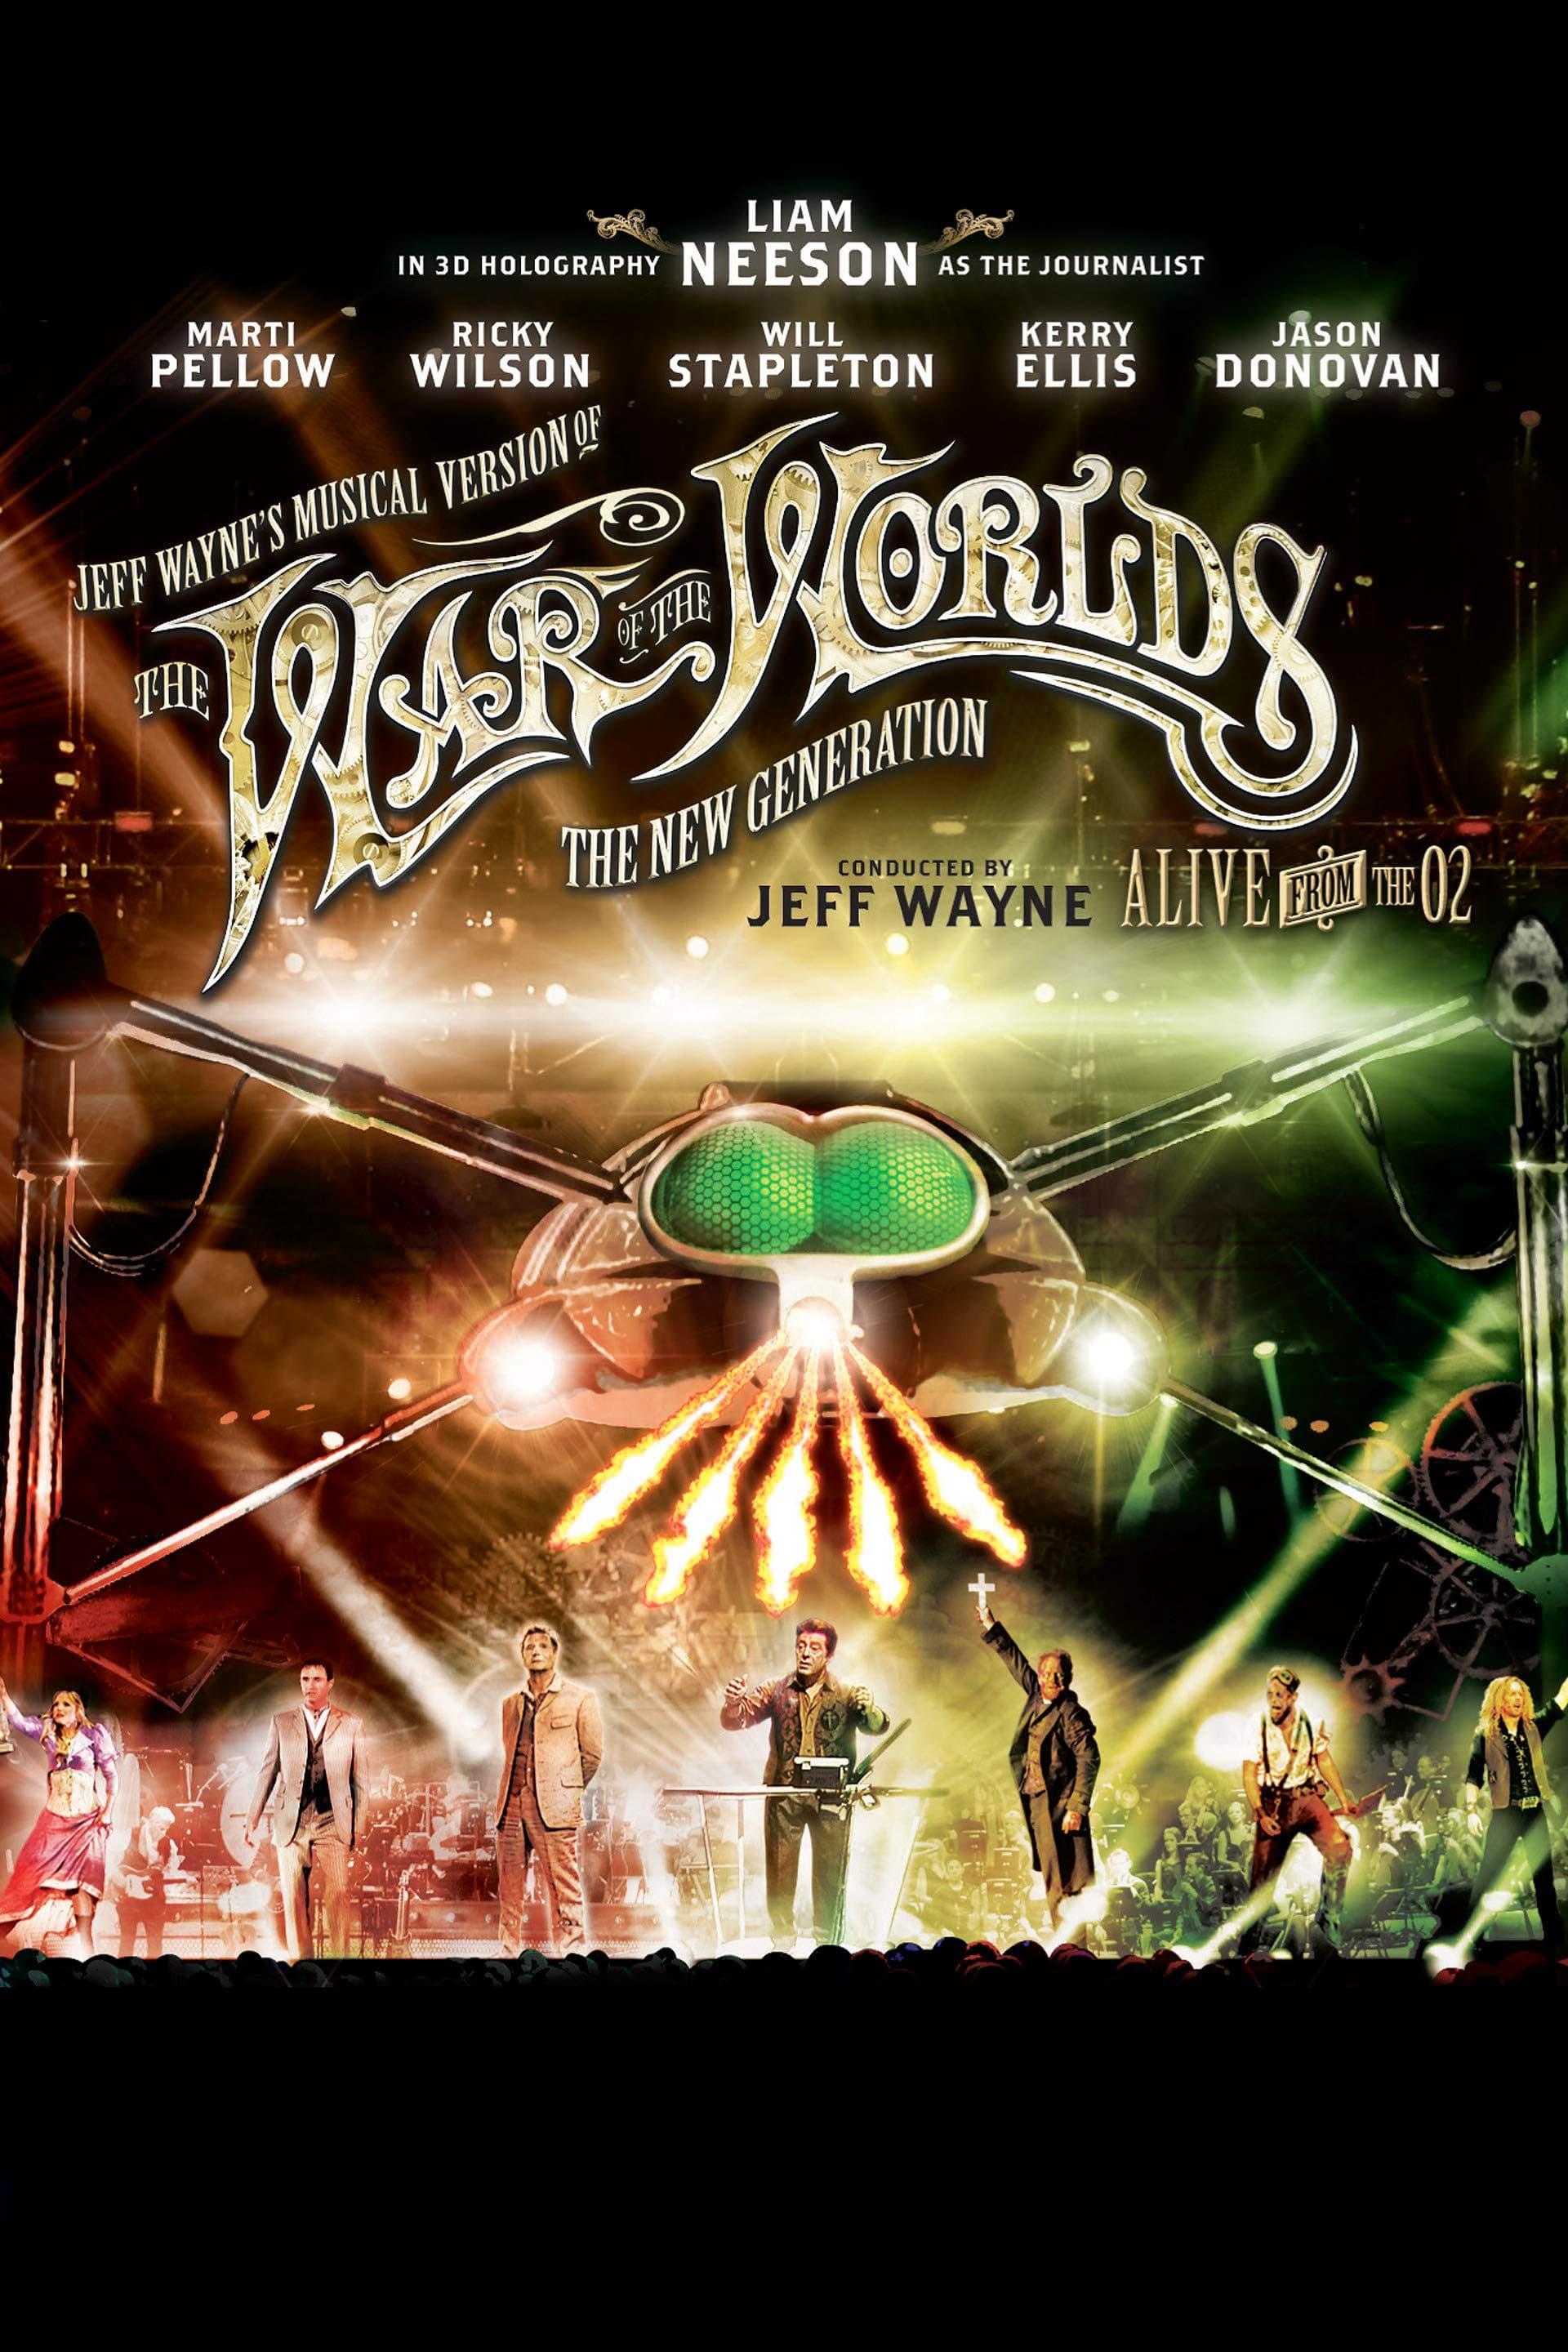 Jeff Wayne's Musical Version of the War of the Worlds - The New Generation: Alive on Stage! poster